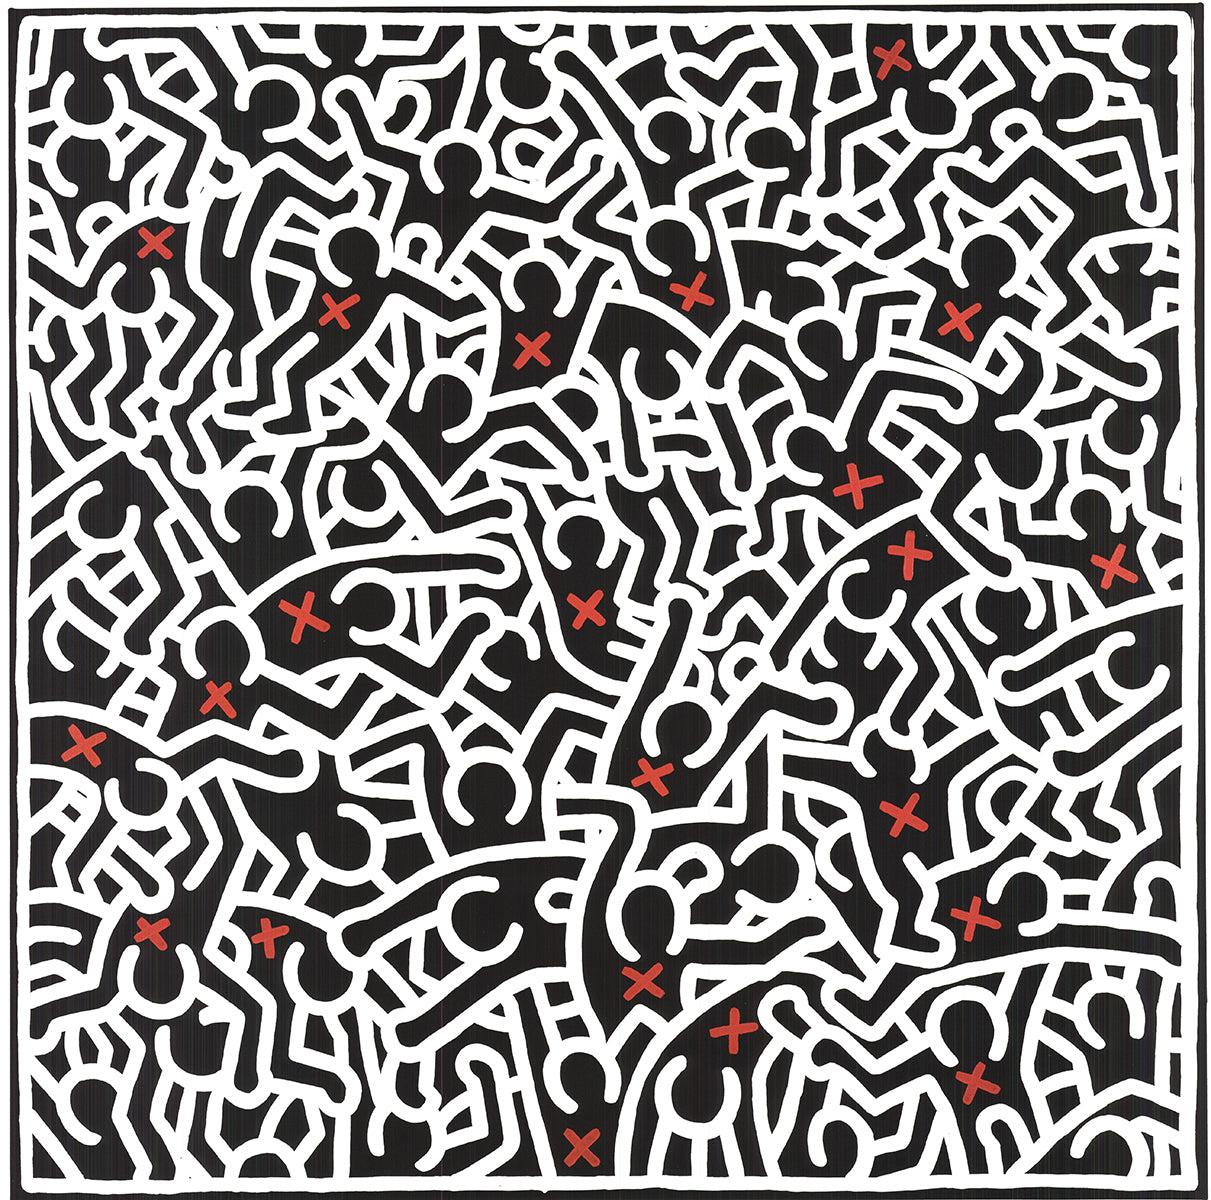 Keith Haring « Untitled, 1985 » 2009- Lithographie offset en vente 1